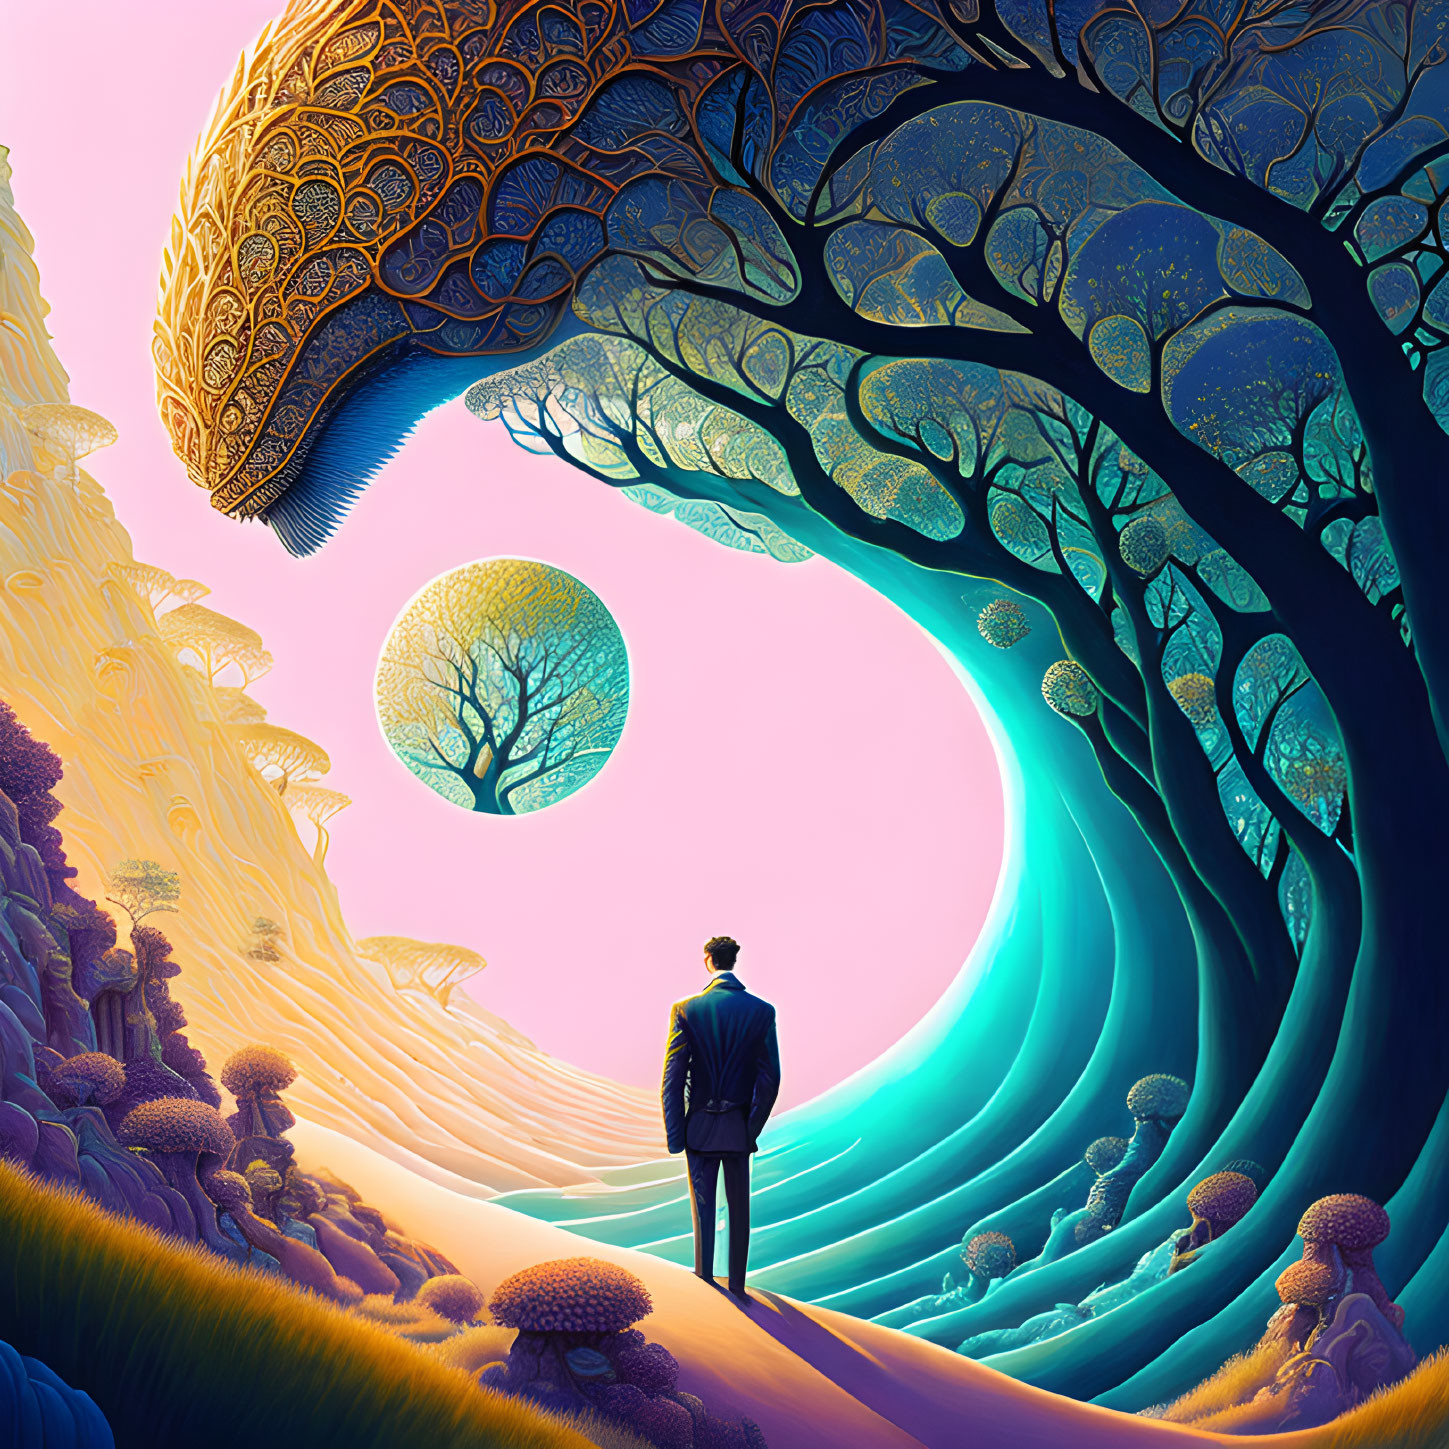 Business person in suit in surreal landscape with brain-patterned tree, floating sphere tree, and luminous